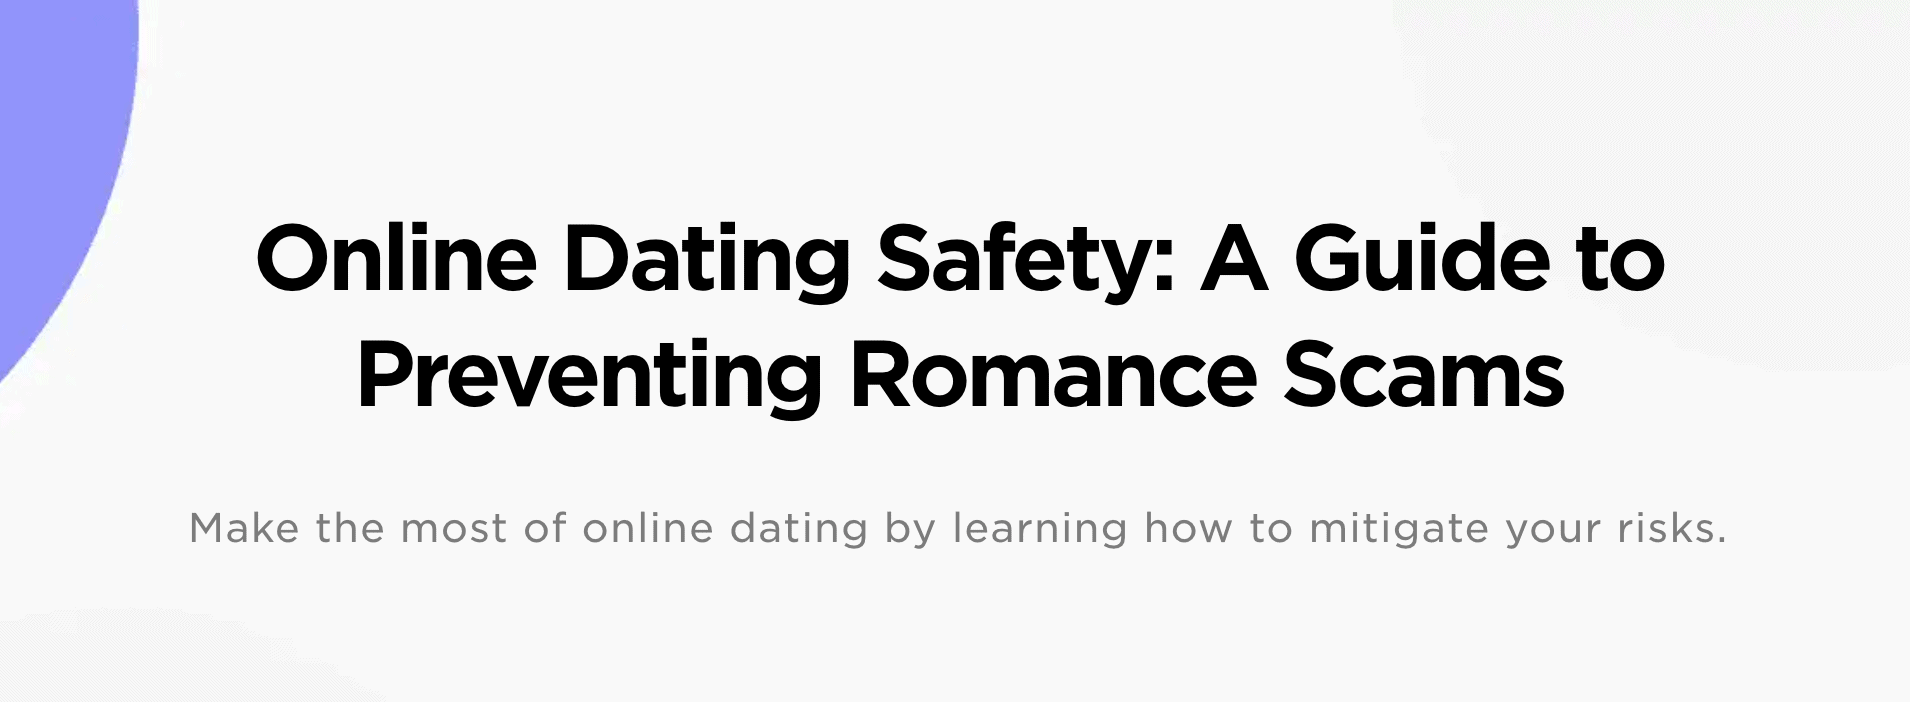 Online Dating Safety: A Guide to Preventing Romance Scams